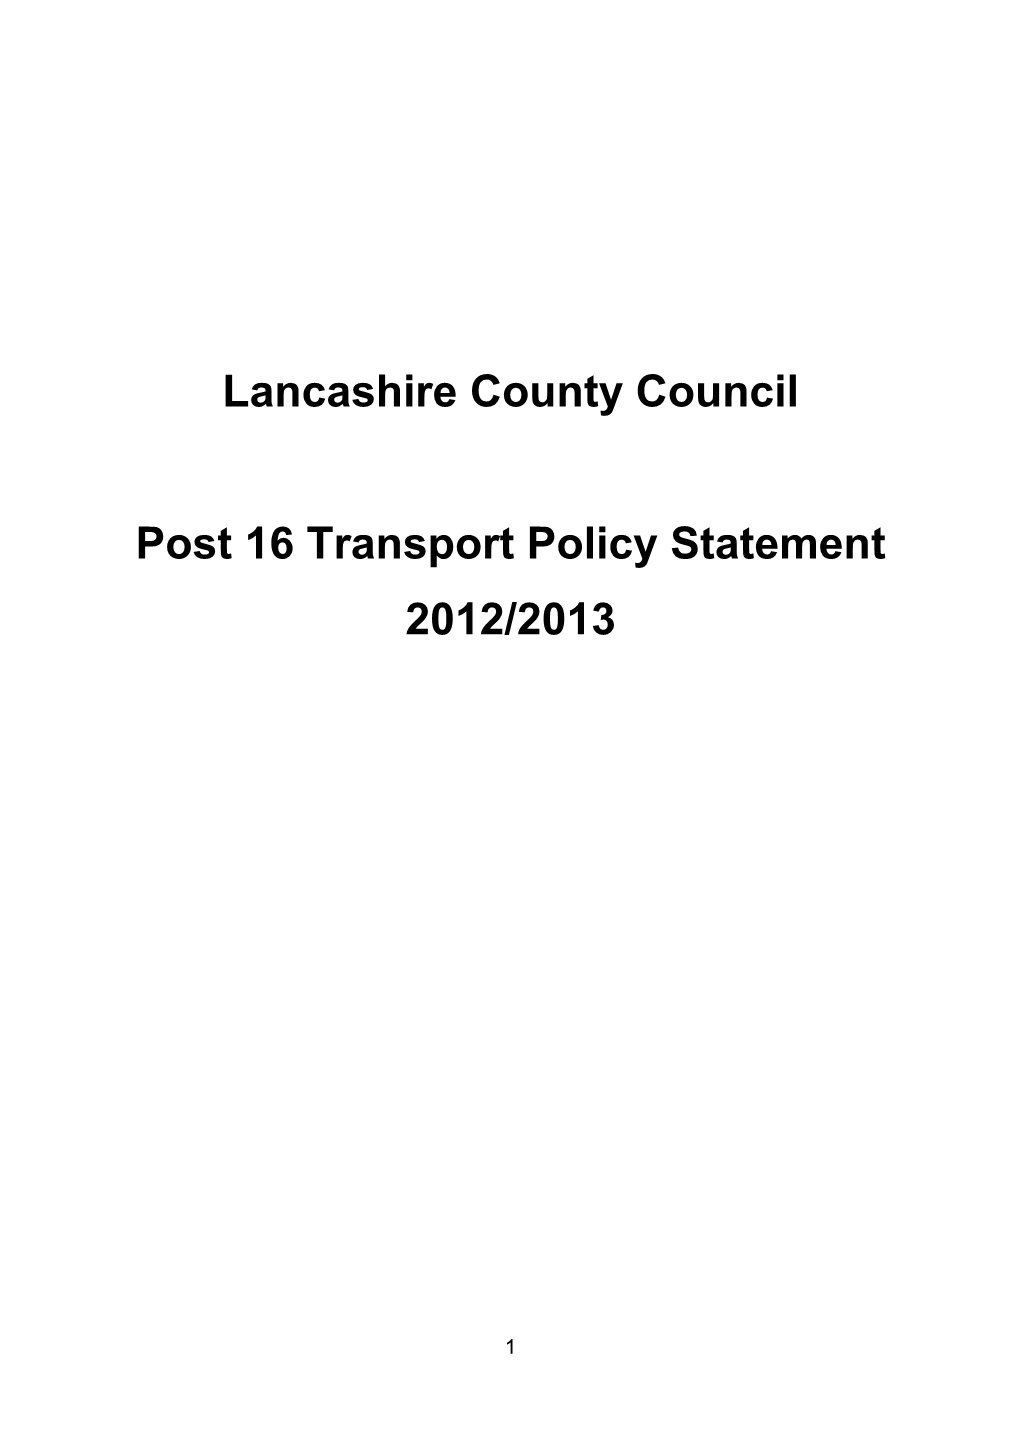 Lancashire County Council Post 16 Transport Policy Statement 2012